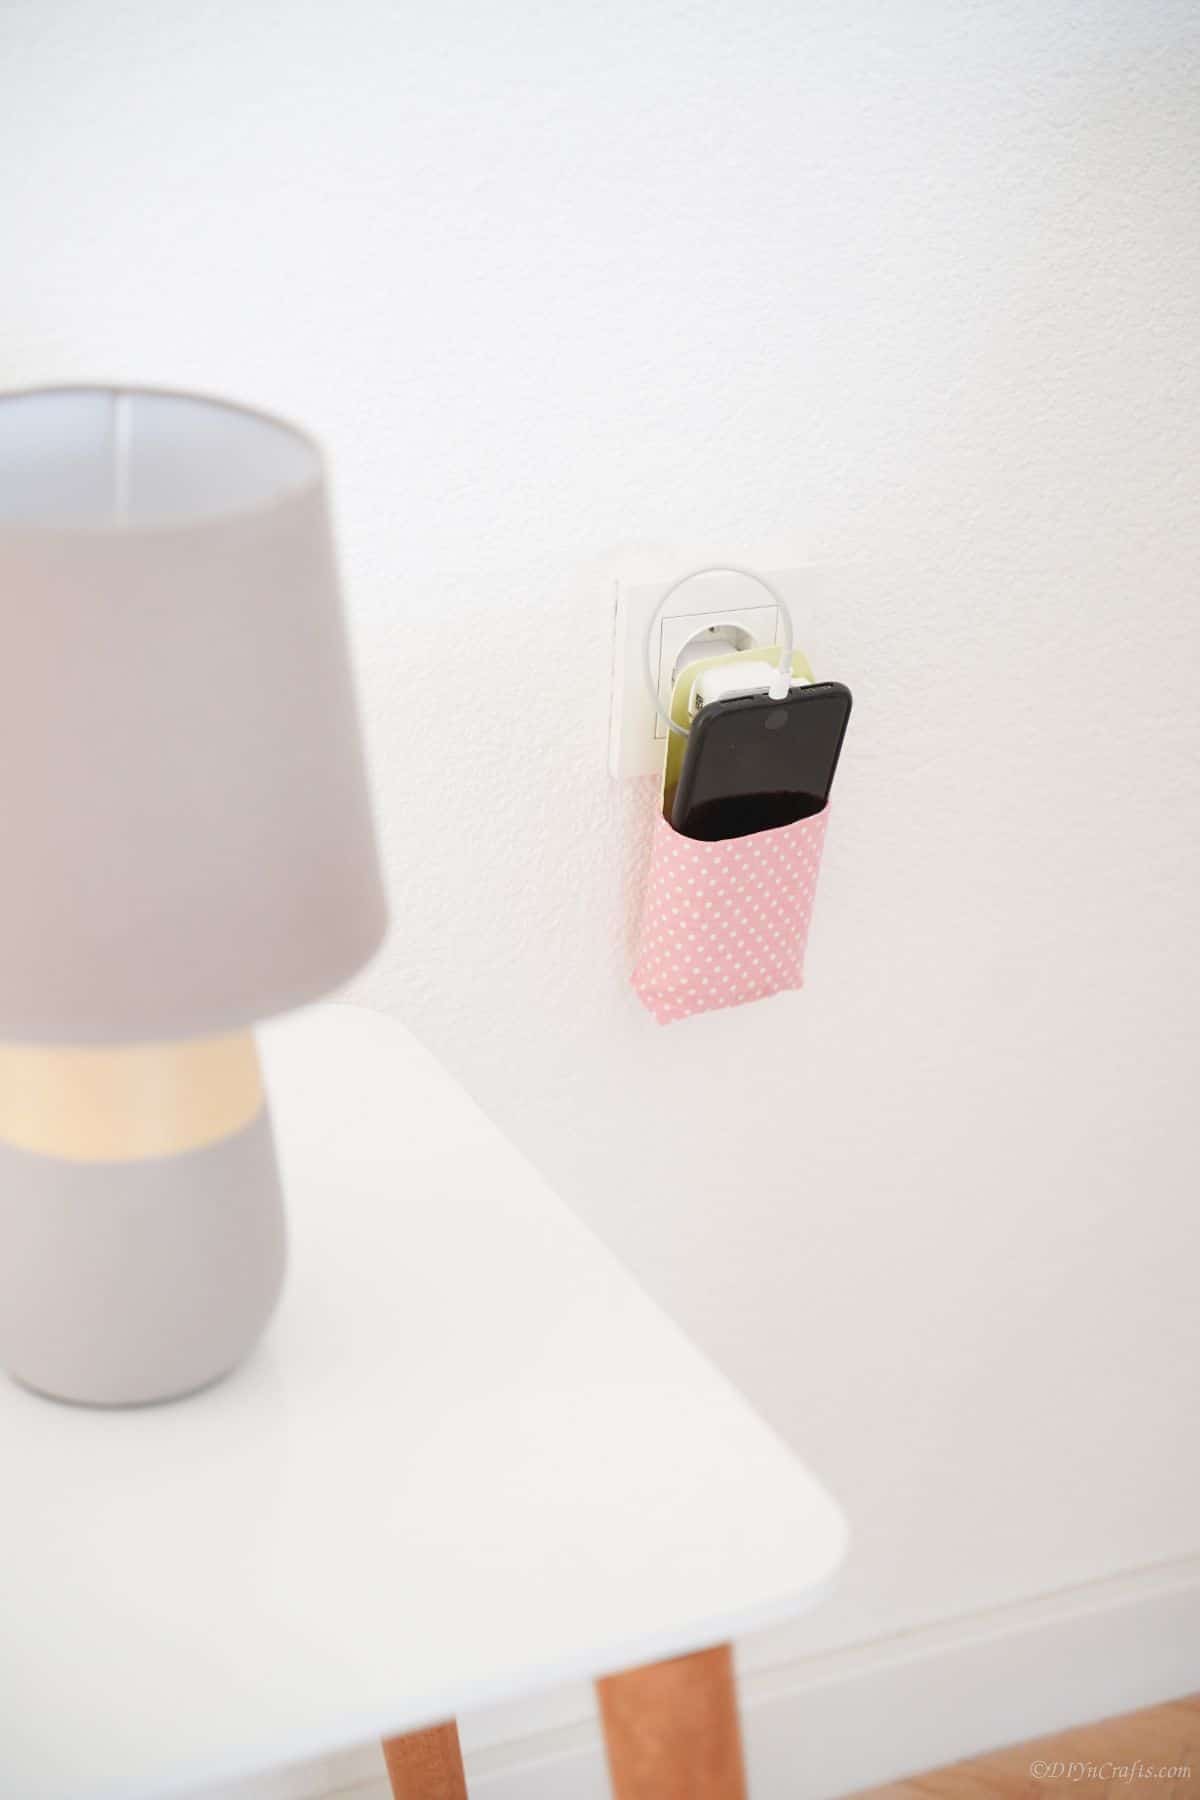 white table with gray lamp next to pink cellphone holder on wall